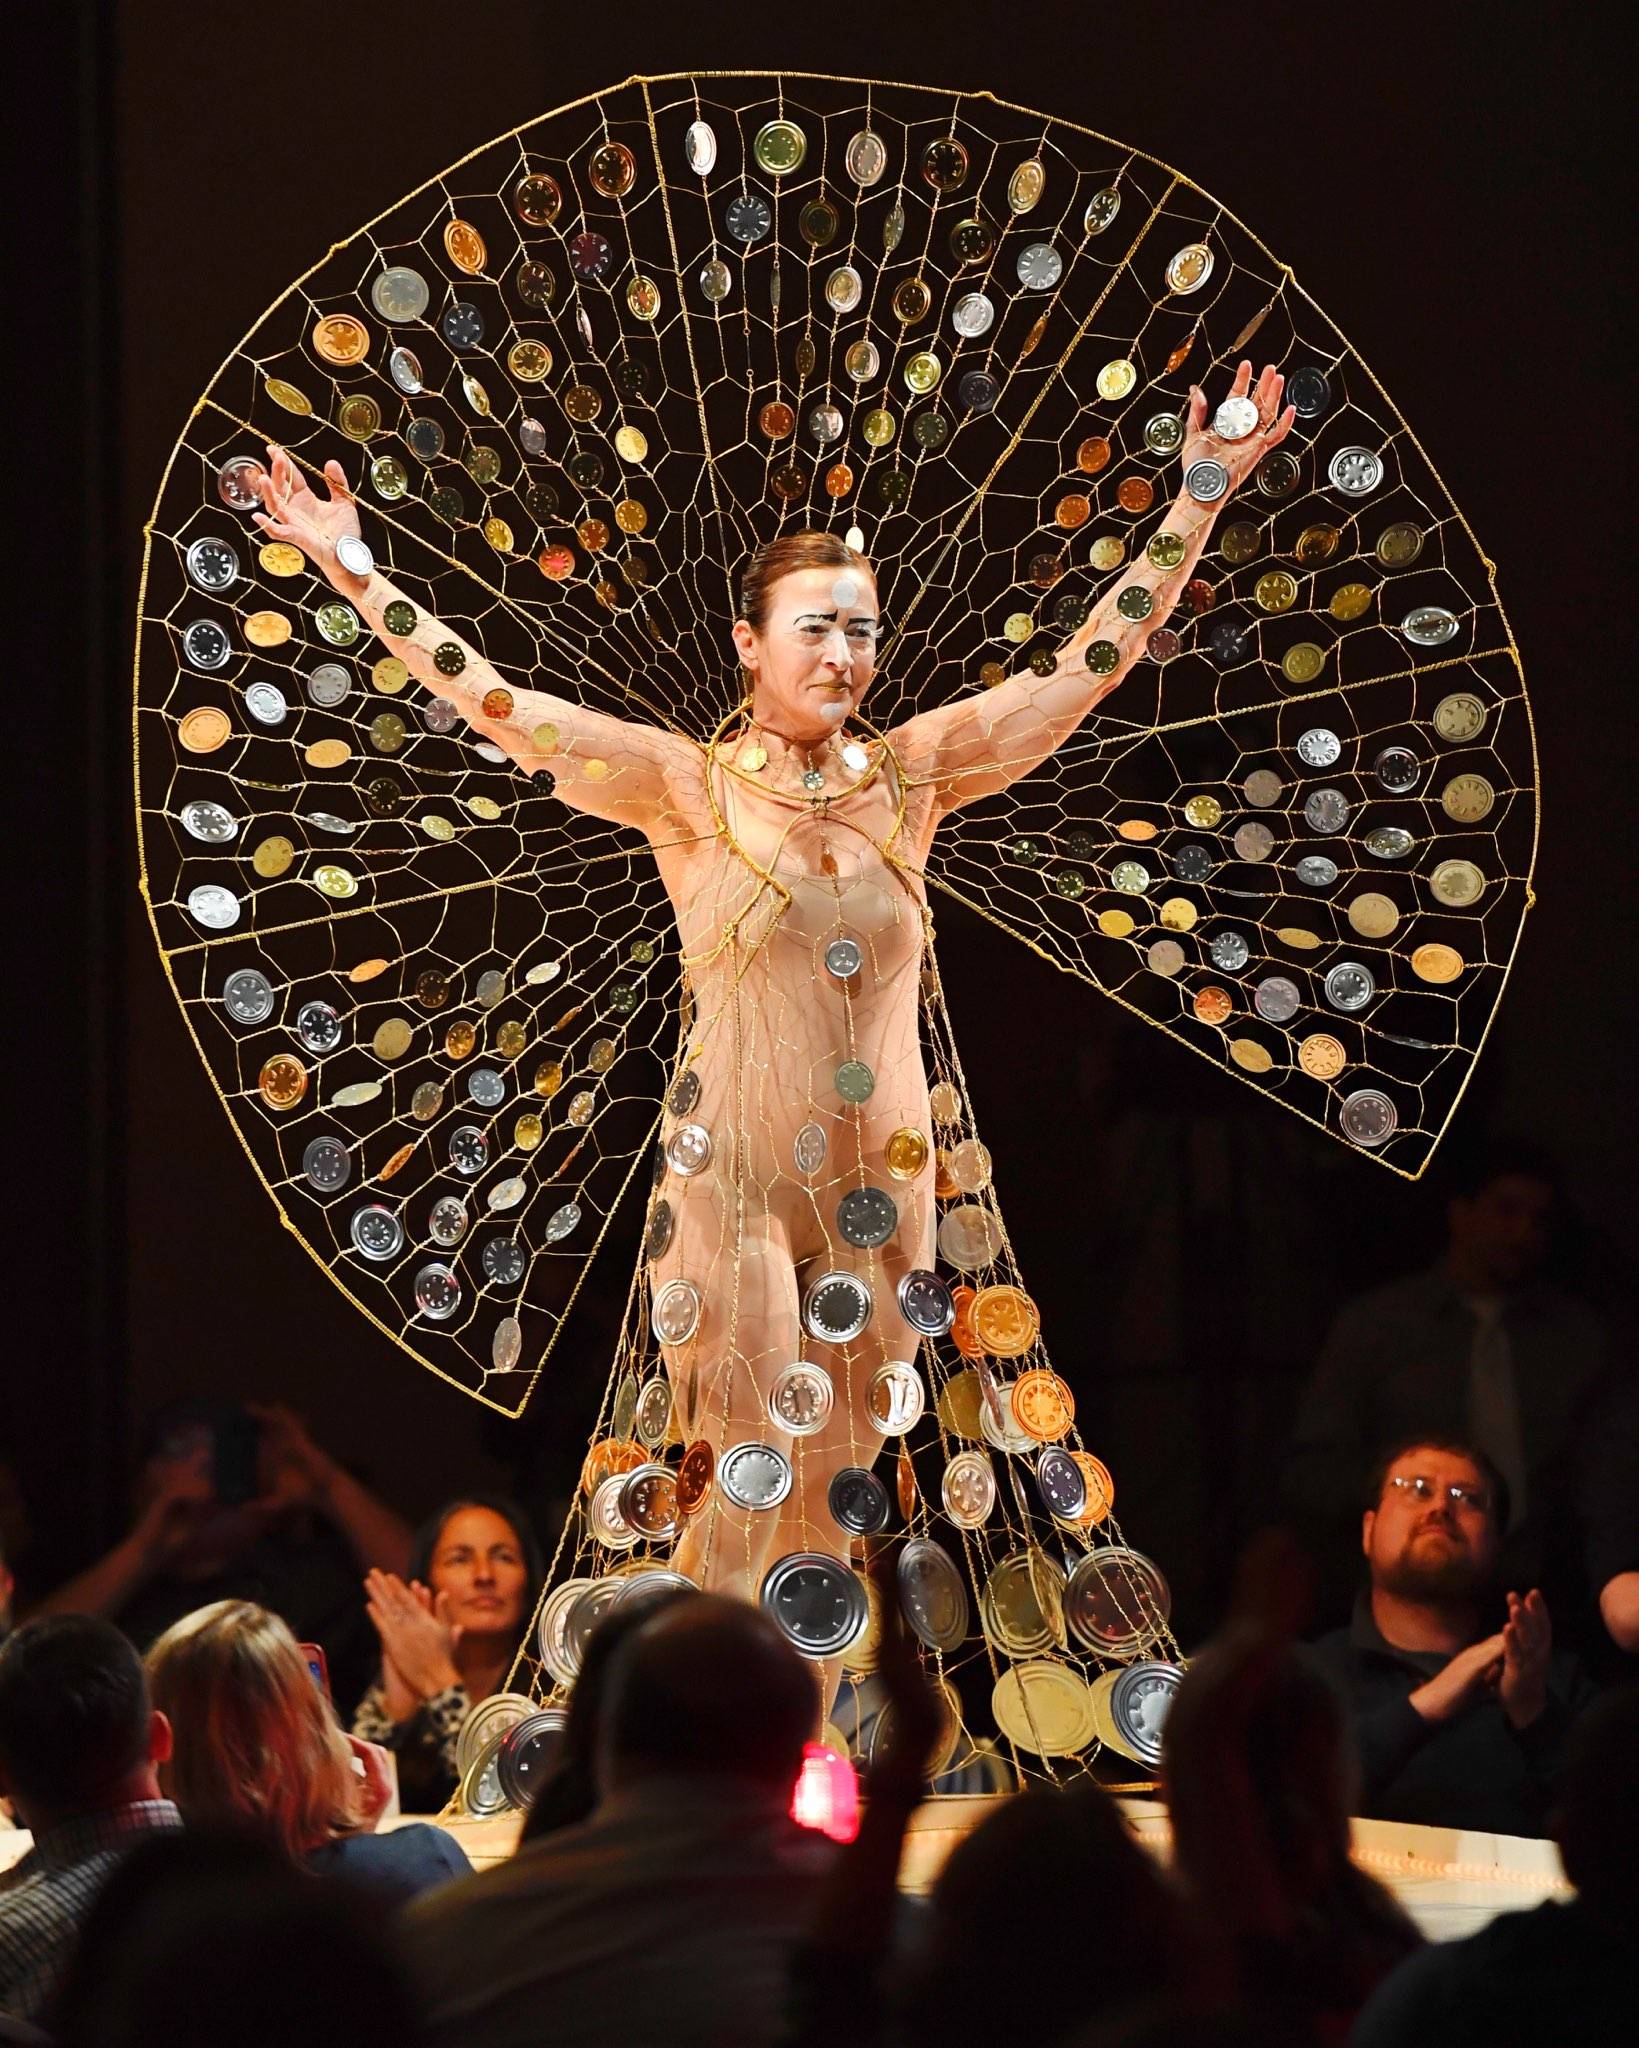 Artist Rhonda Jenkins Gardinier makes her way along the runway in her creation titled “Wishes & Prayers in Turbulent Times” of wire, wire hangers, tin can ends and fishing swivels at the Wearable Art show at Centennial Hall on Saturday, Feb. 16, 2019. (Michael Penn | Capital City Weekly)